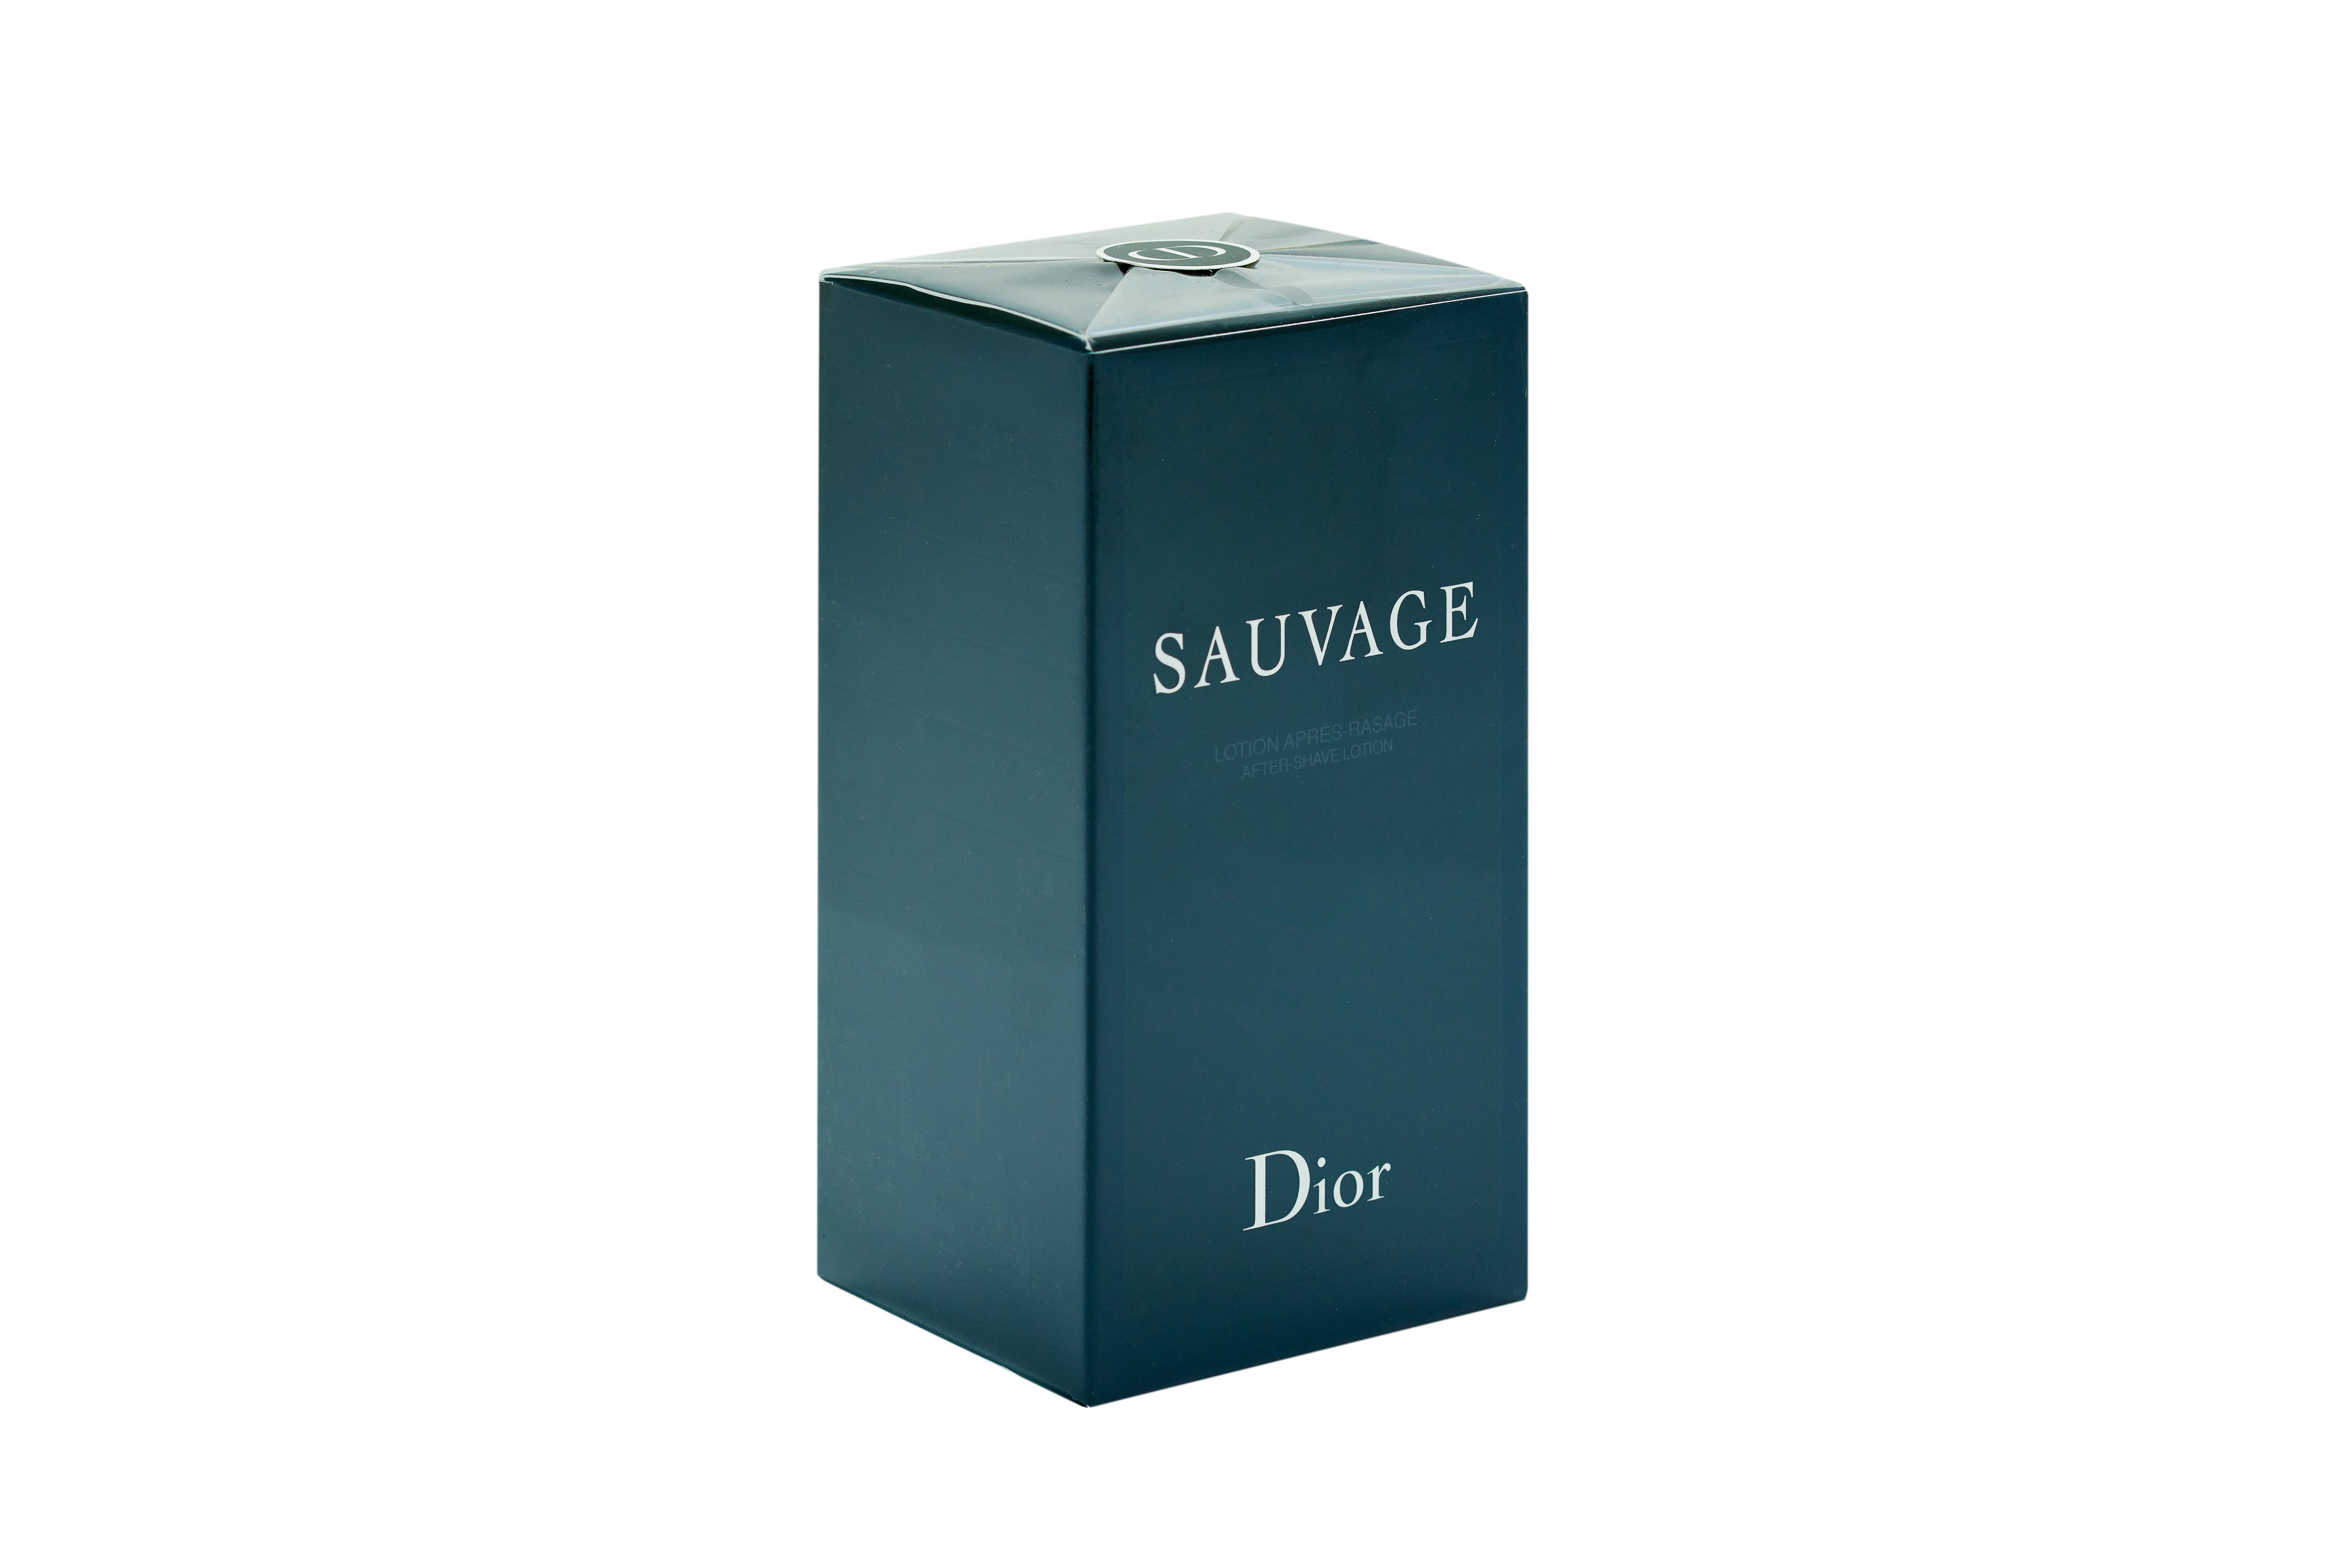 After 100 Dior Lotion Sauvage ml After Dior Shave Shave